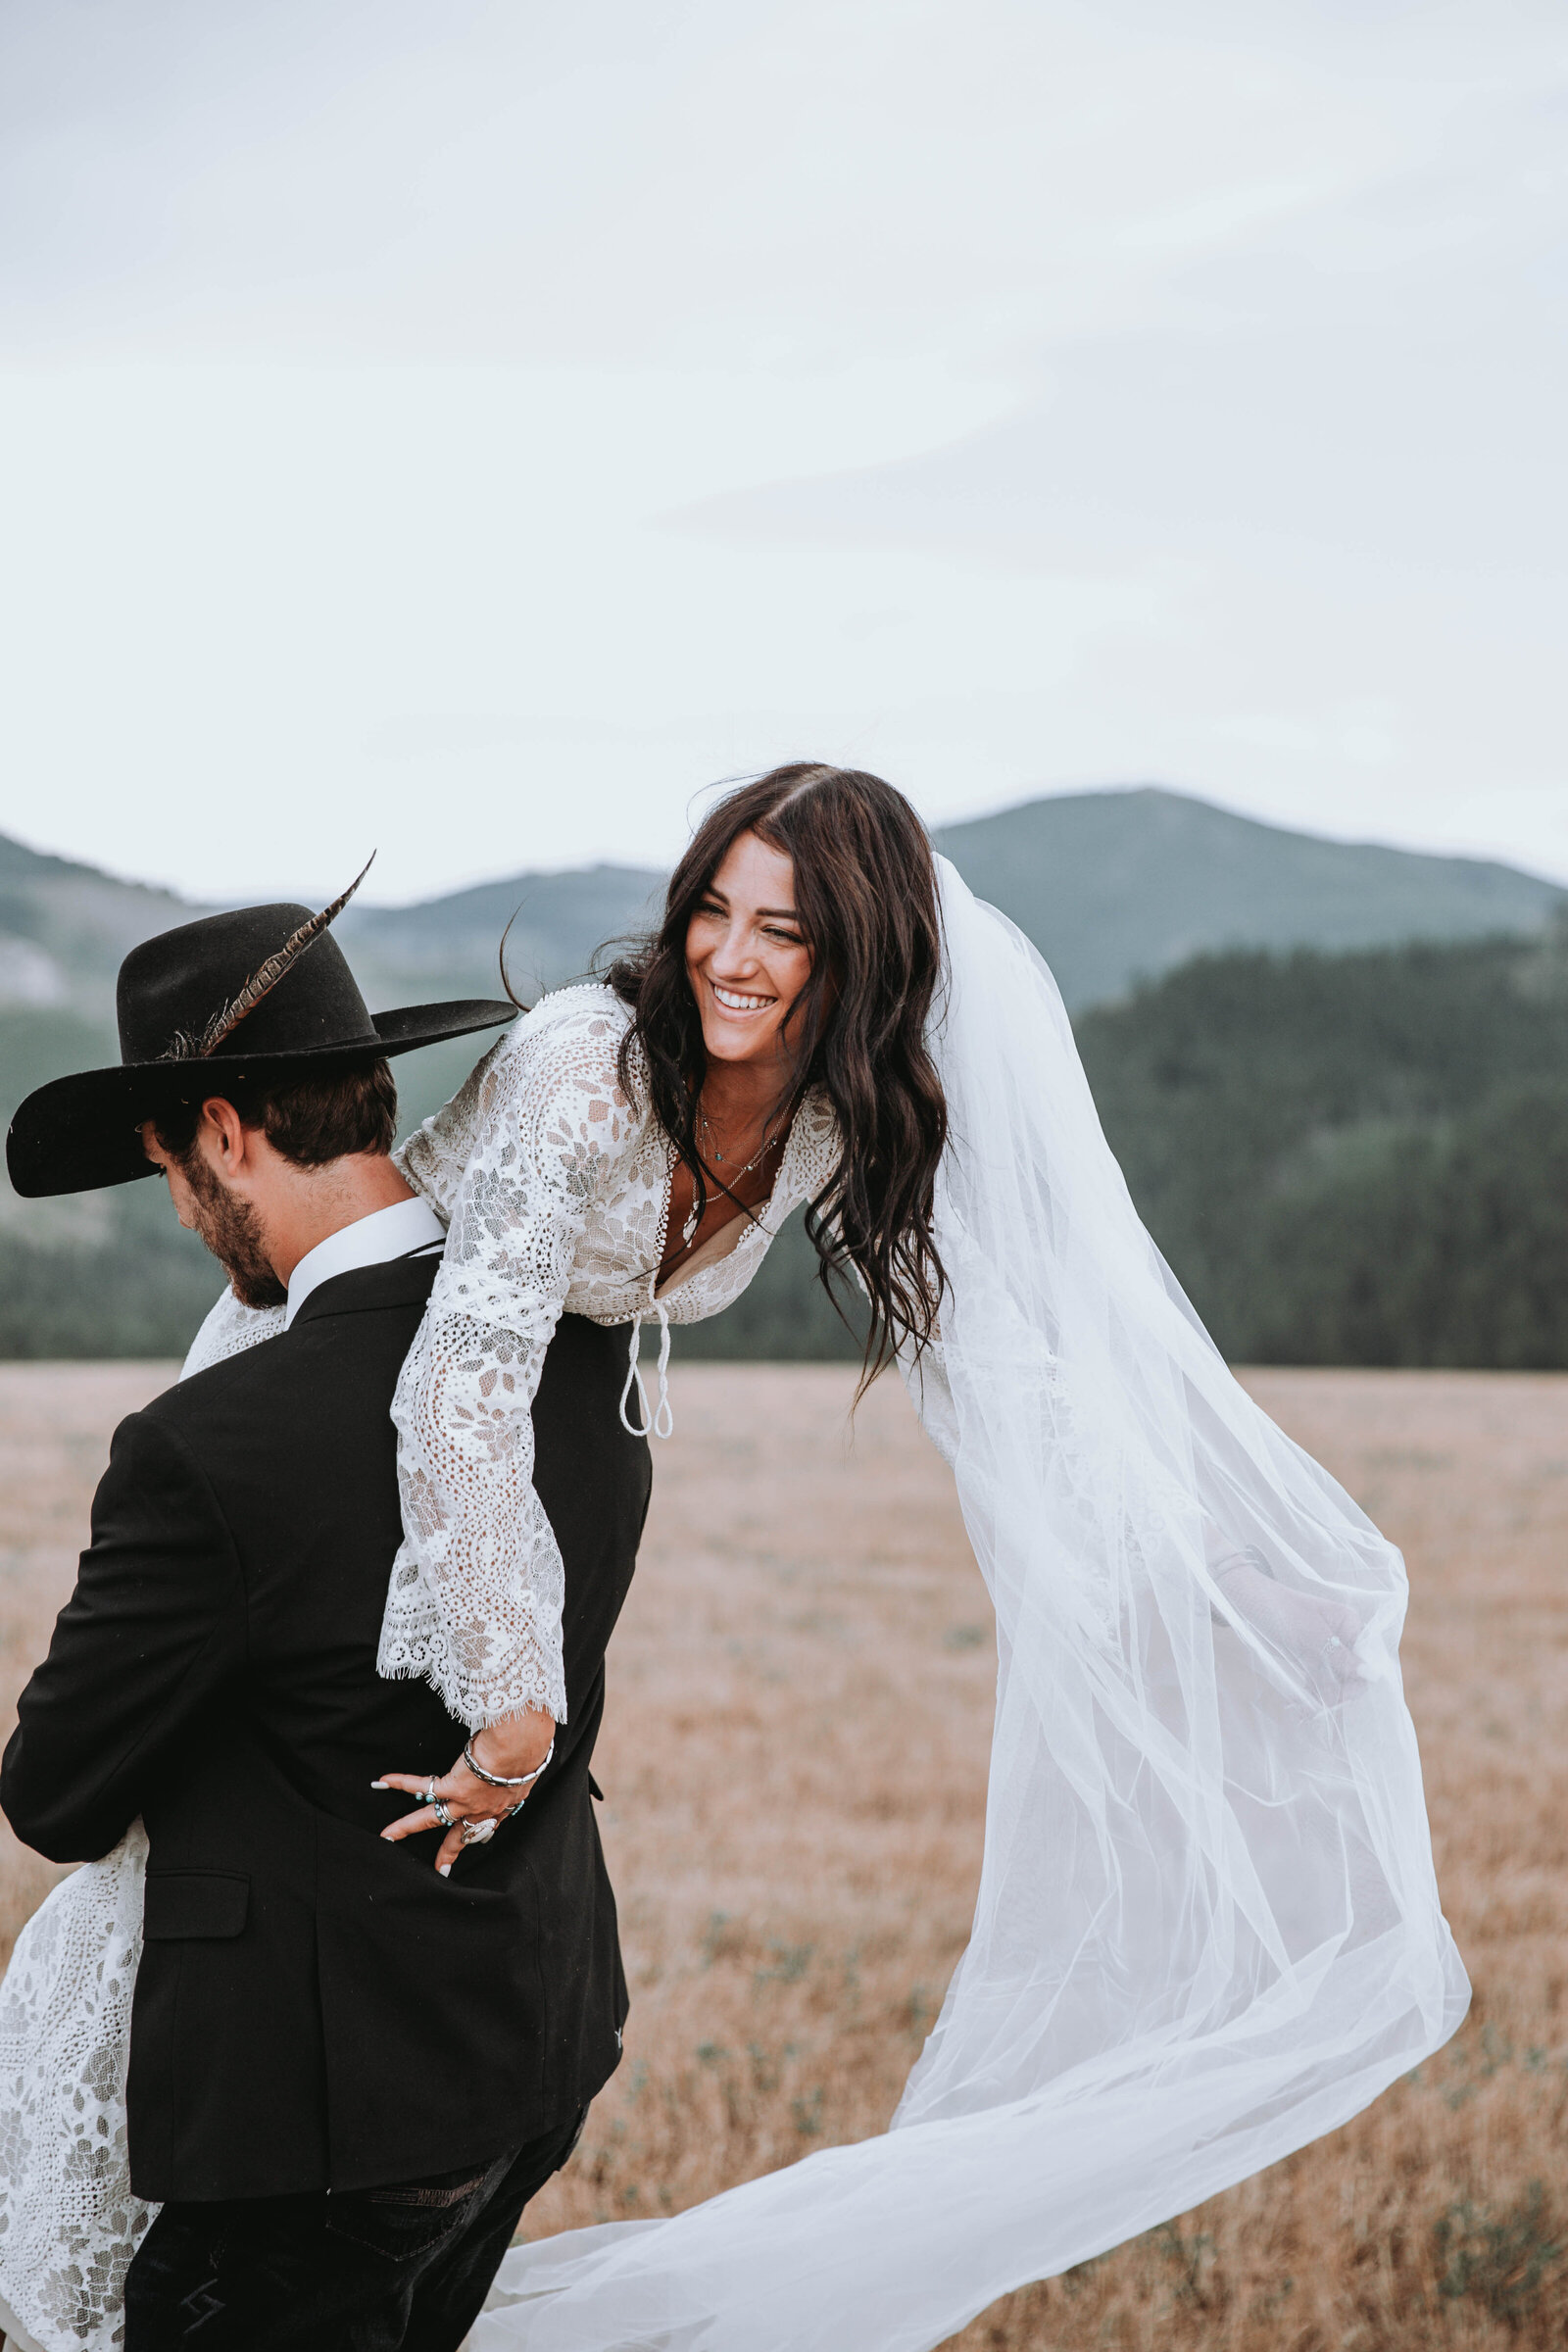 blushing bride gets lifted and twirled by her groom while her veil flows in the wind captured by Idaho Falls Wedding Photographer